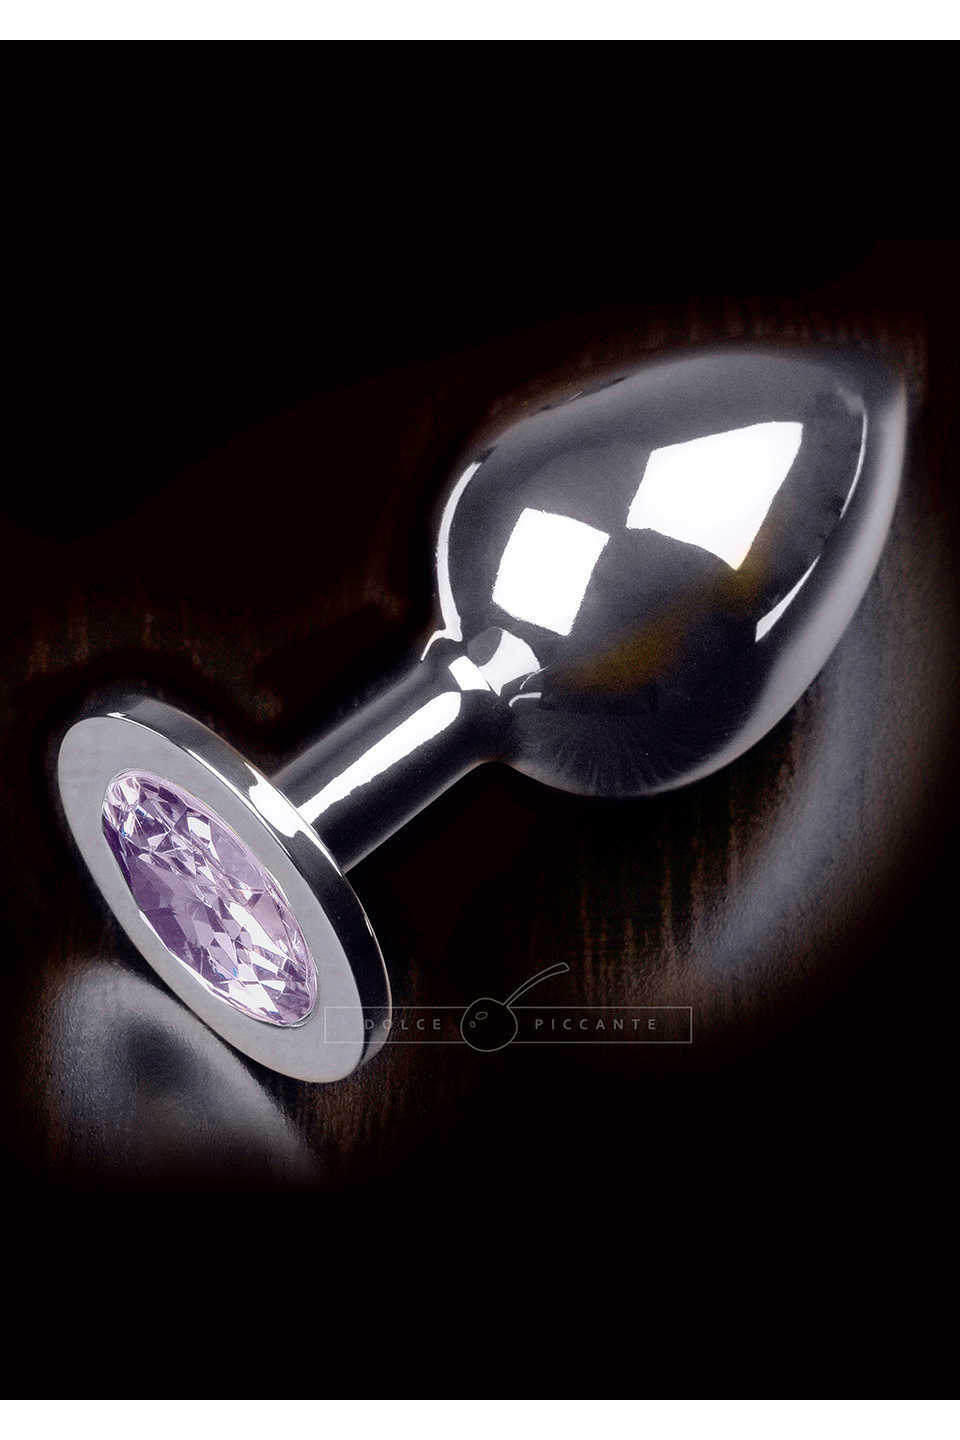 Dolce Piccante Buttplug Jewellery Large Silver Purple